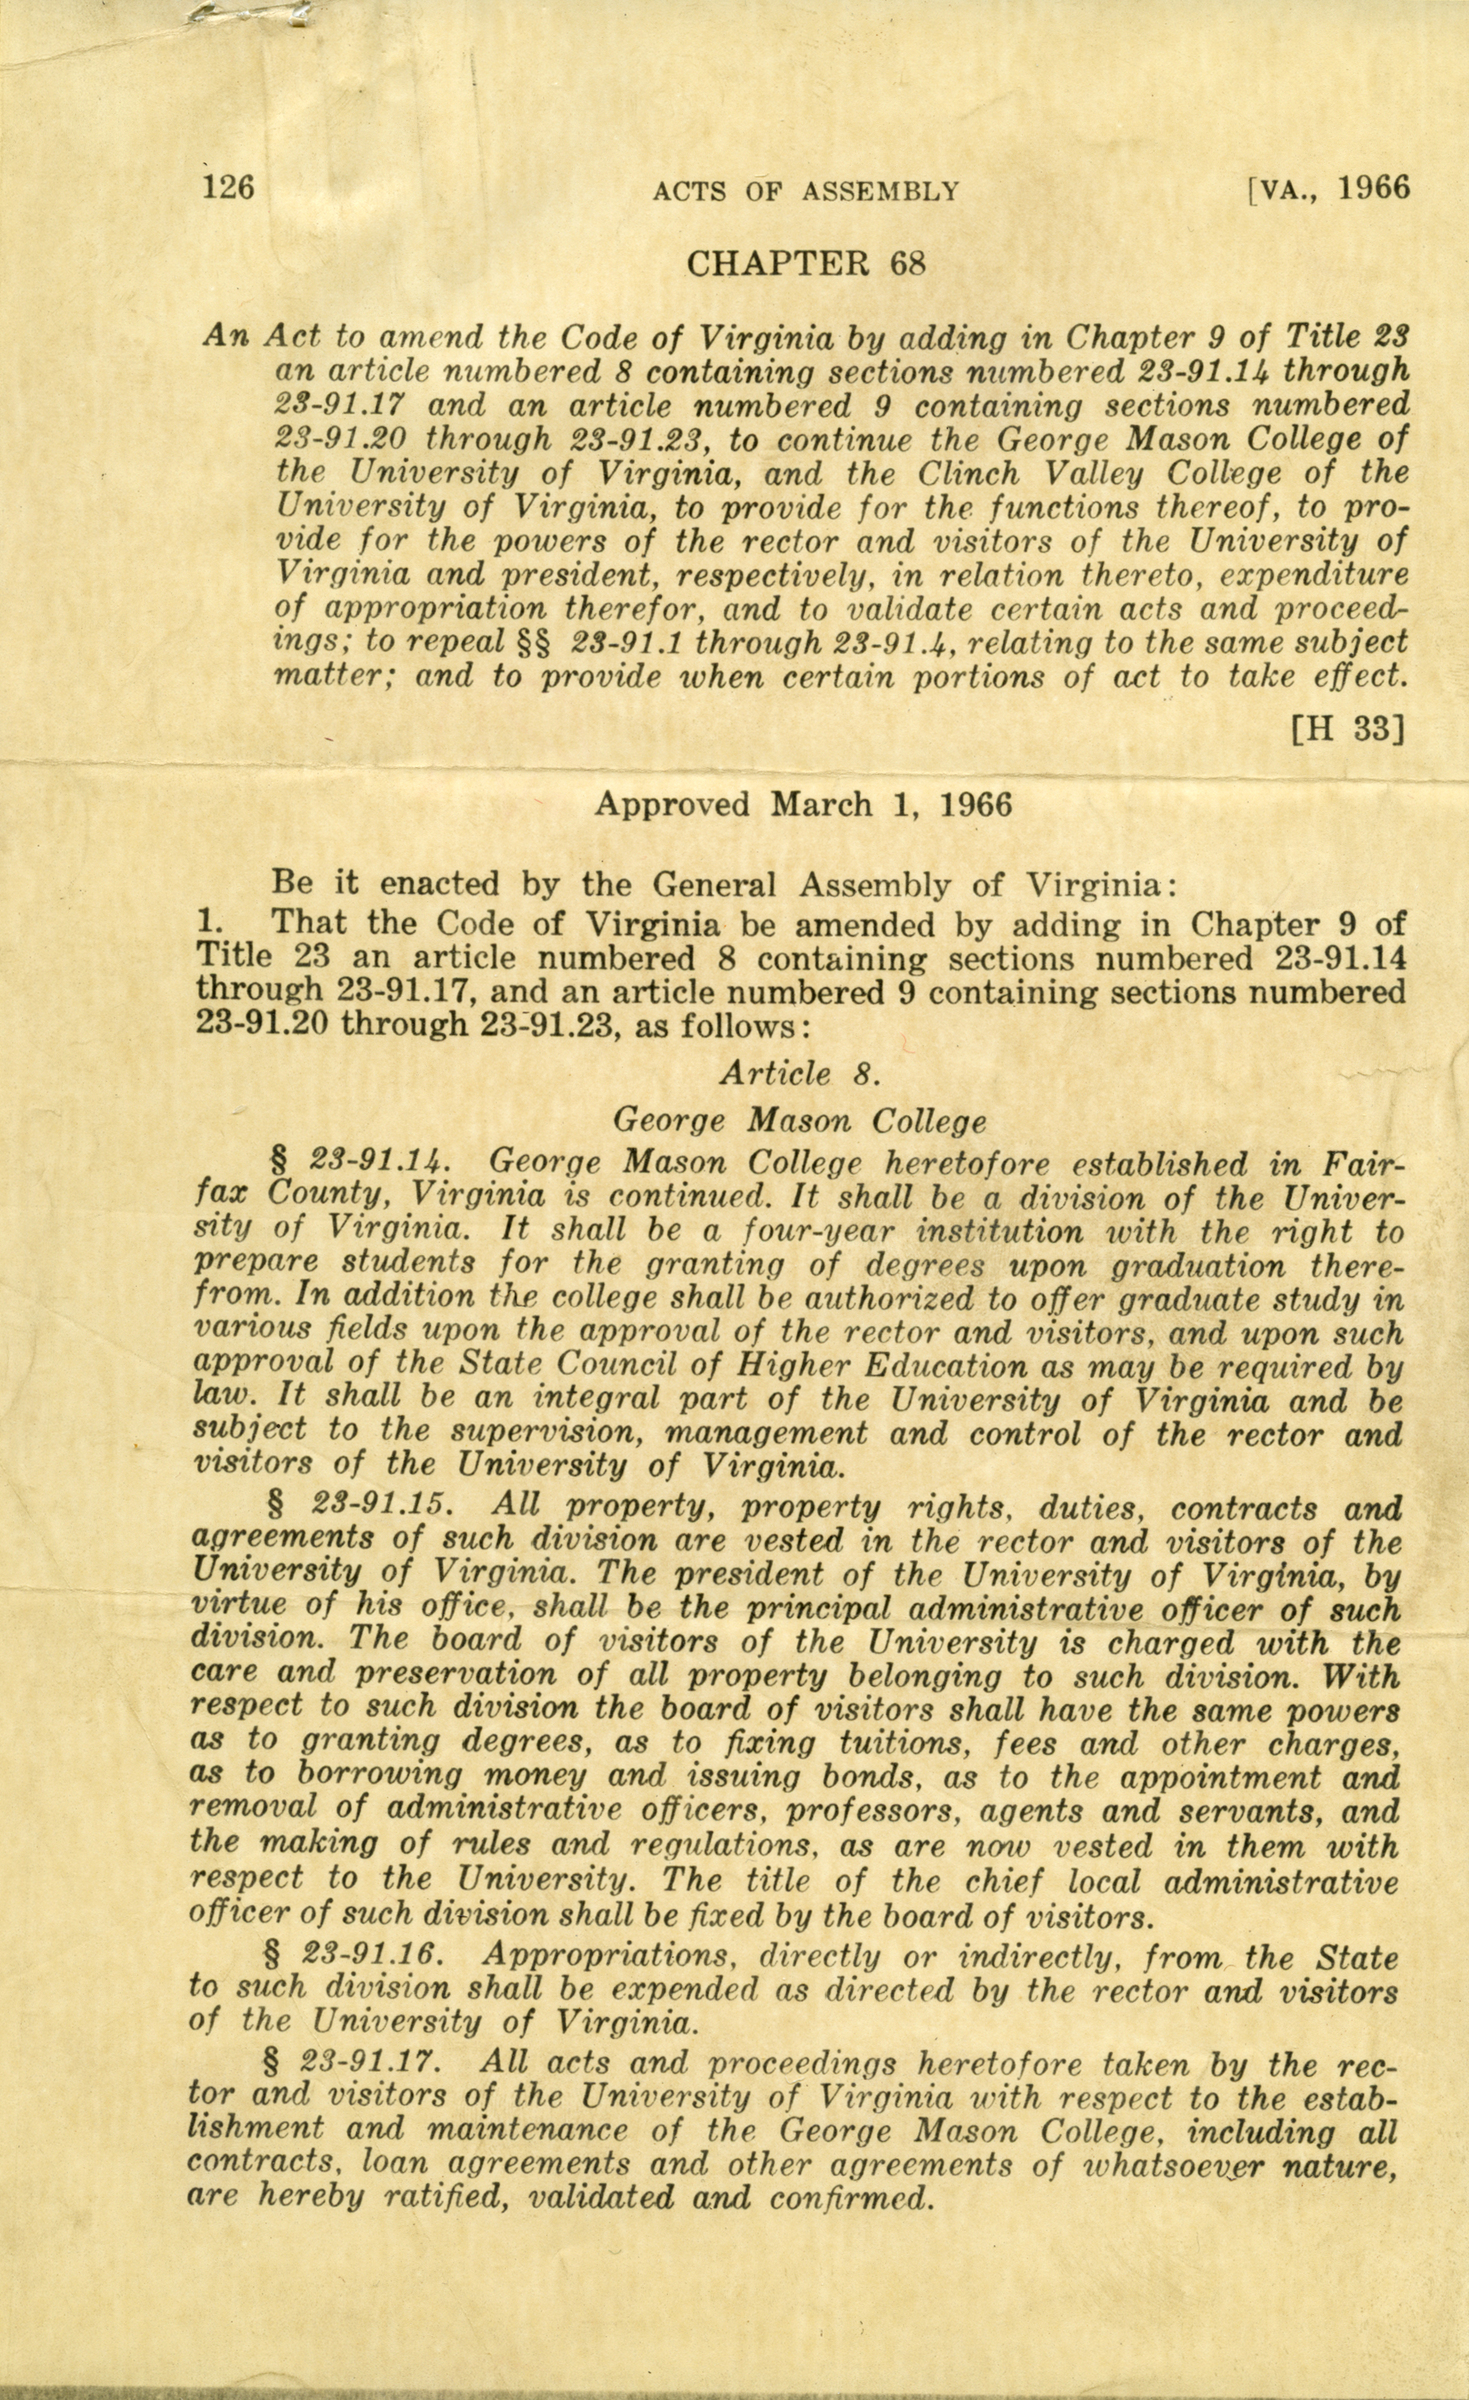 Acts of Assembly, Chapter 68 [H33] Article 8. George Mason College, March 1, 1966.